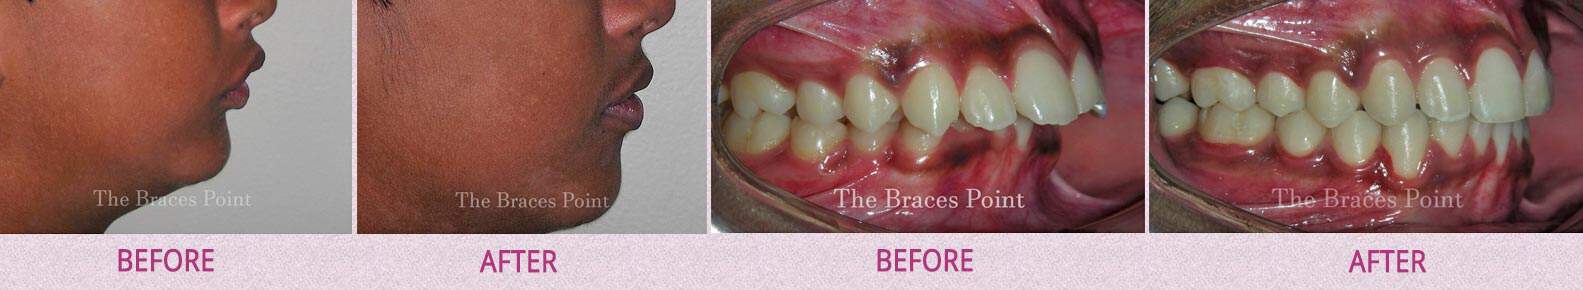 Before And After Orthodontics Thebracespoint 09